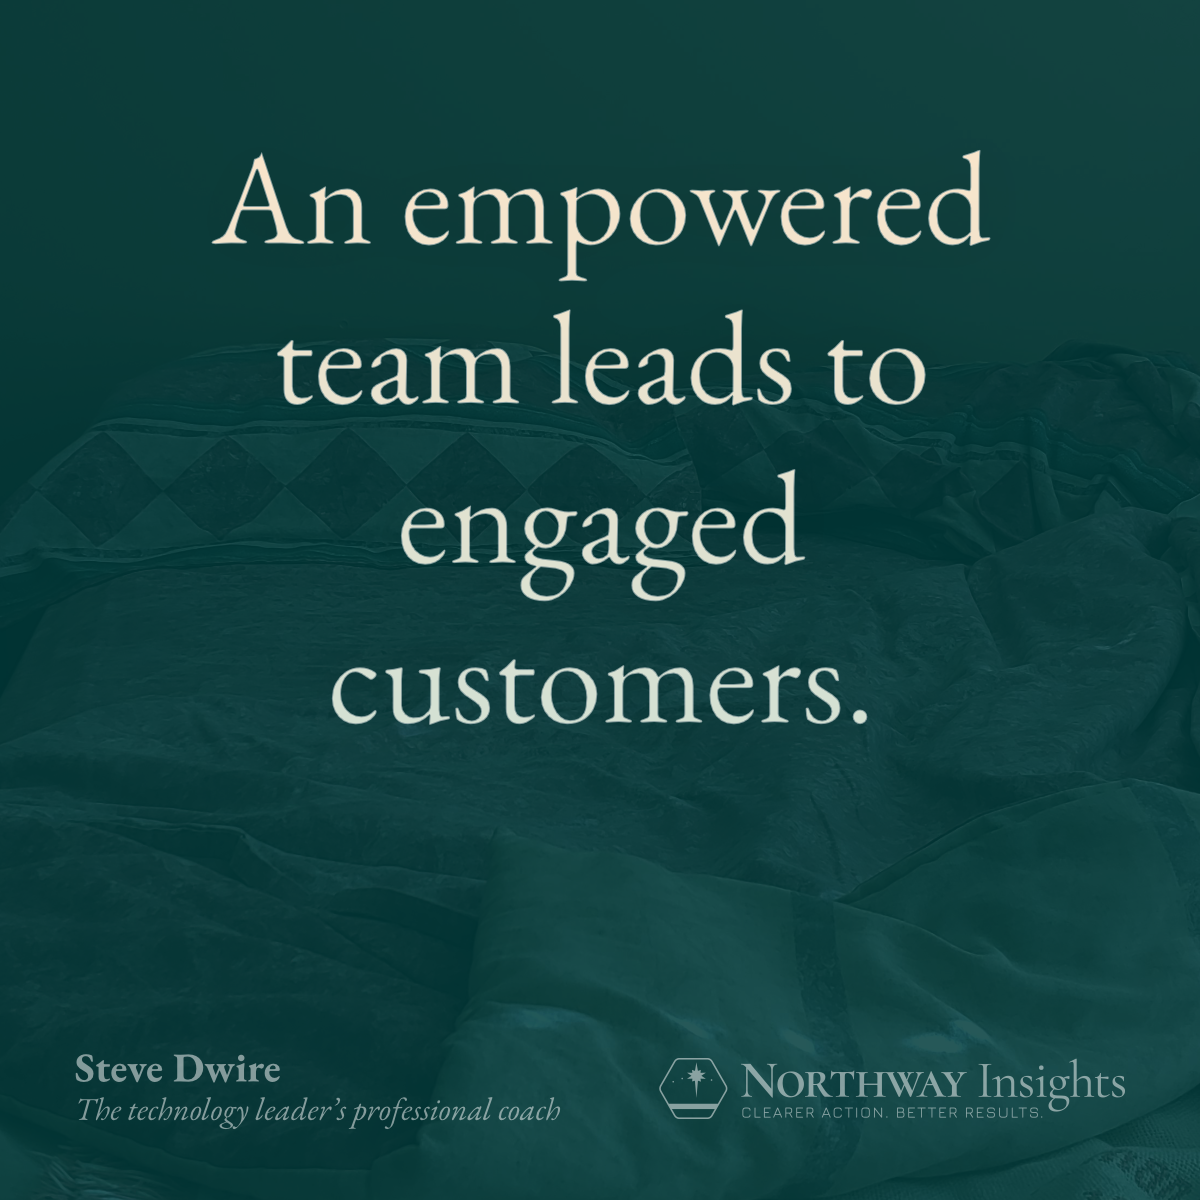 An empowered team leads to engaged customers